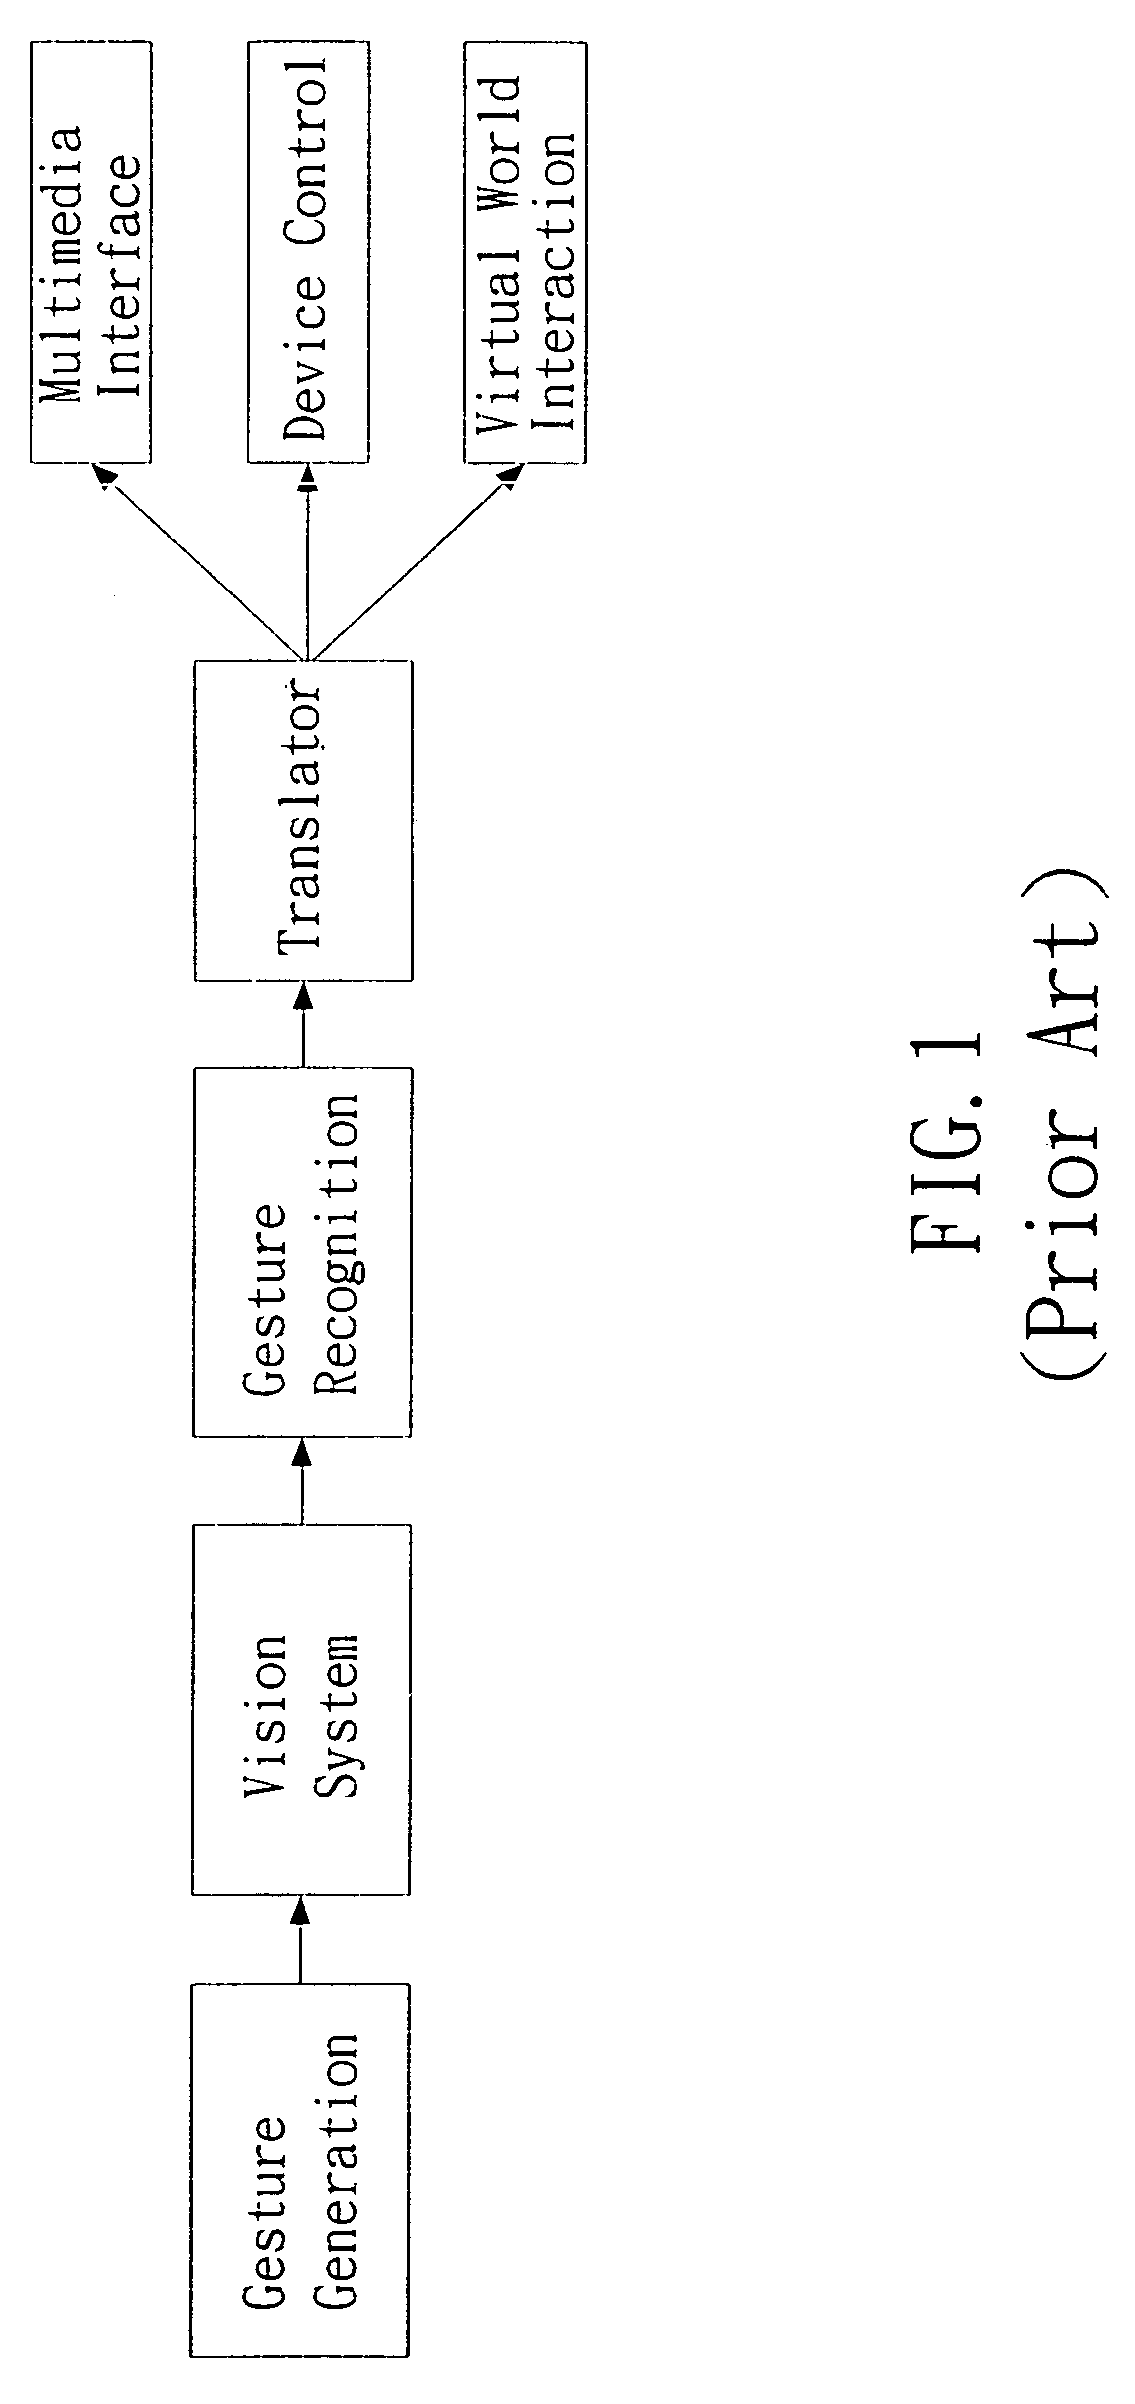 Motion recognition system and method for controlling electronic devices